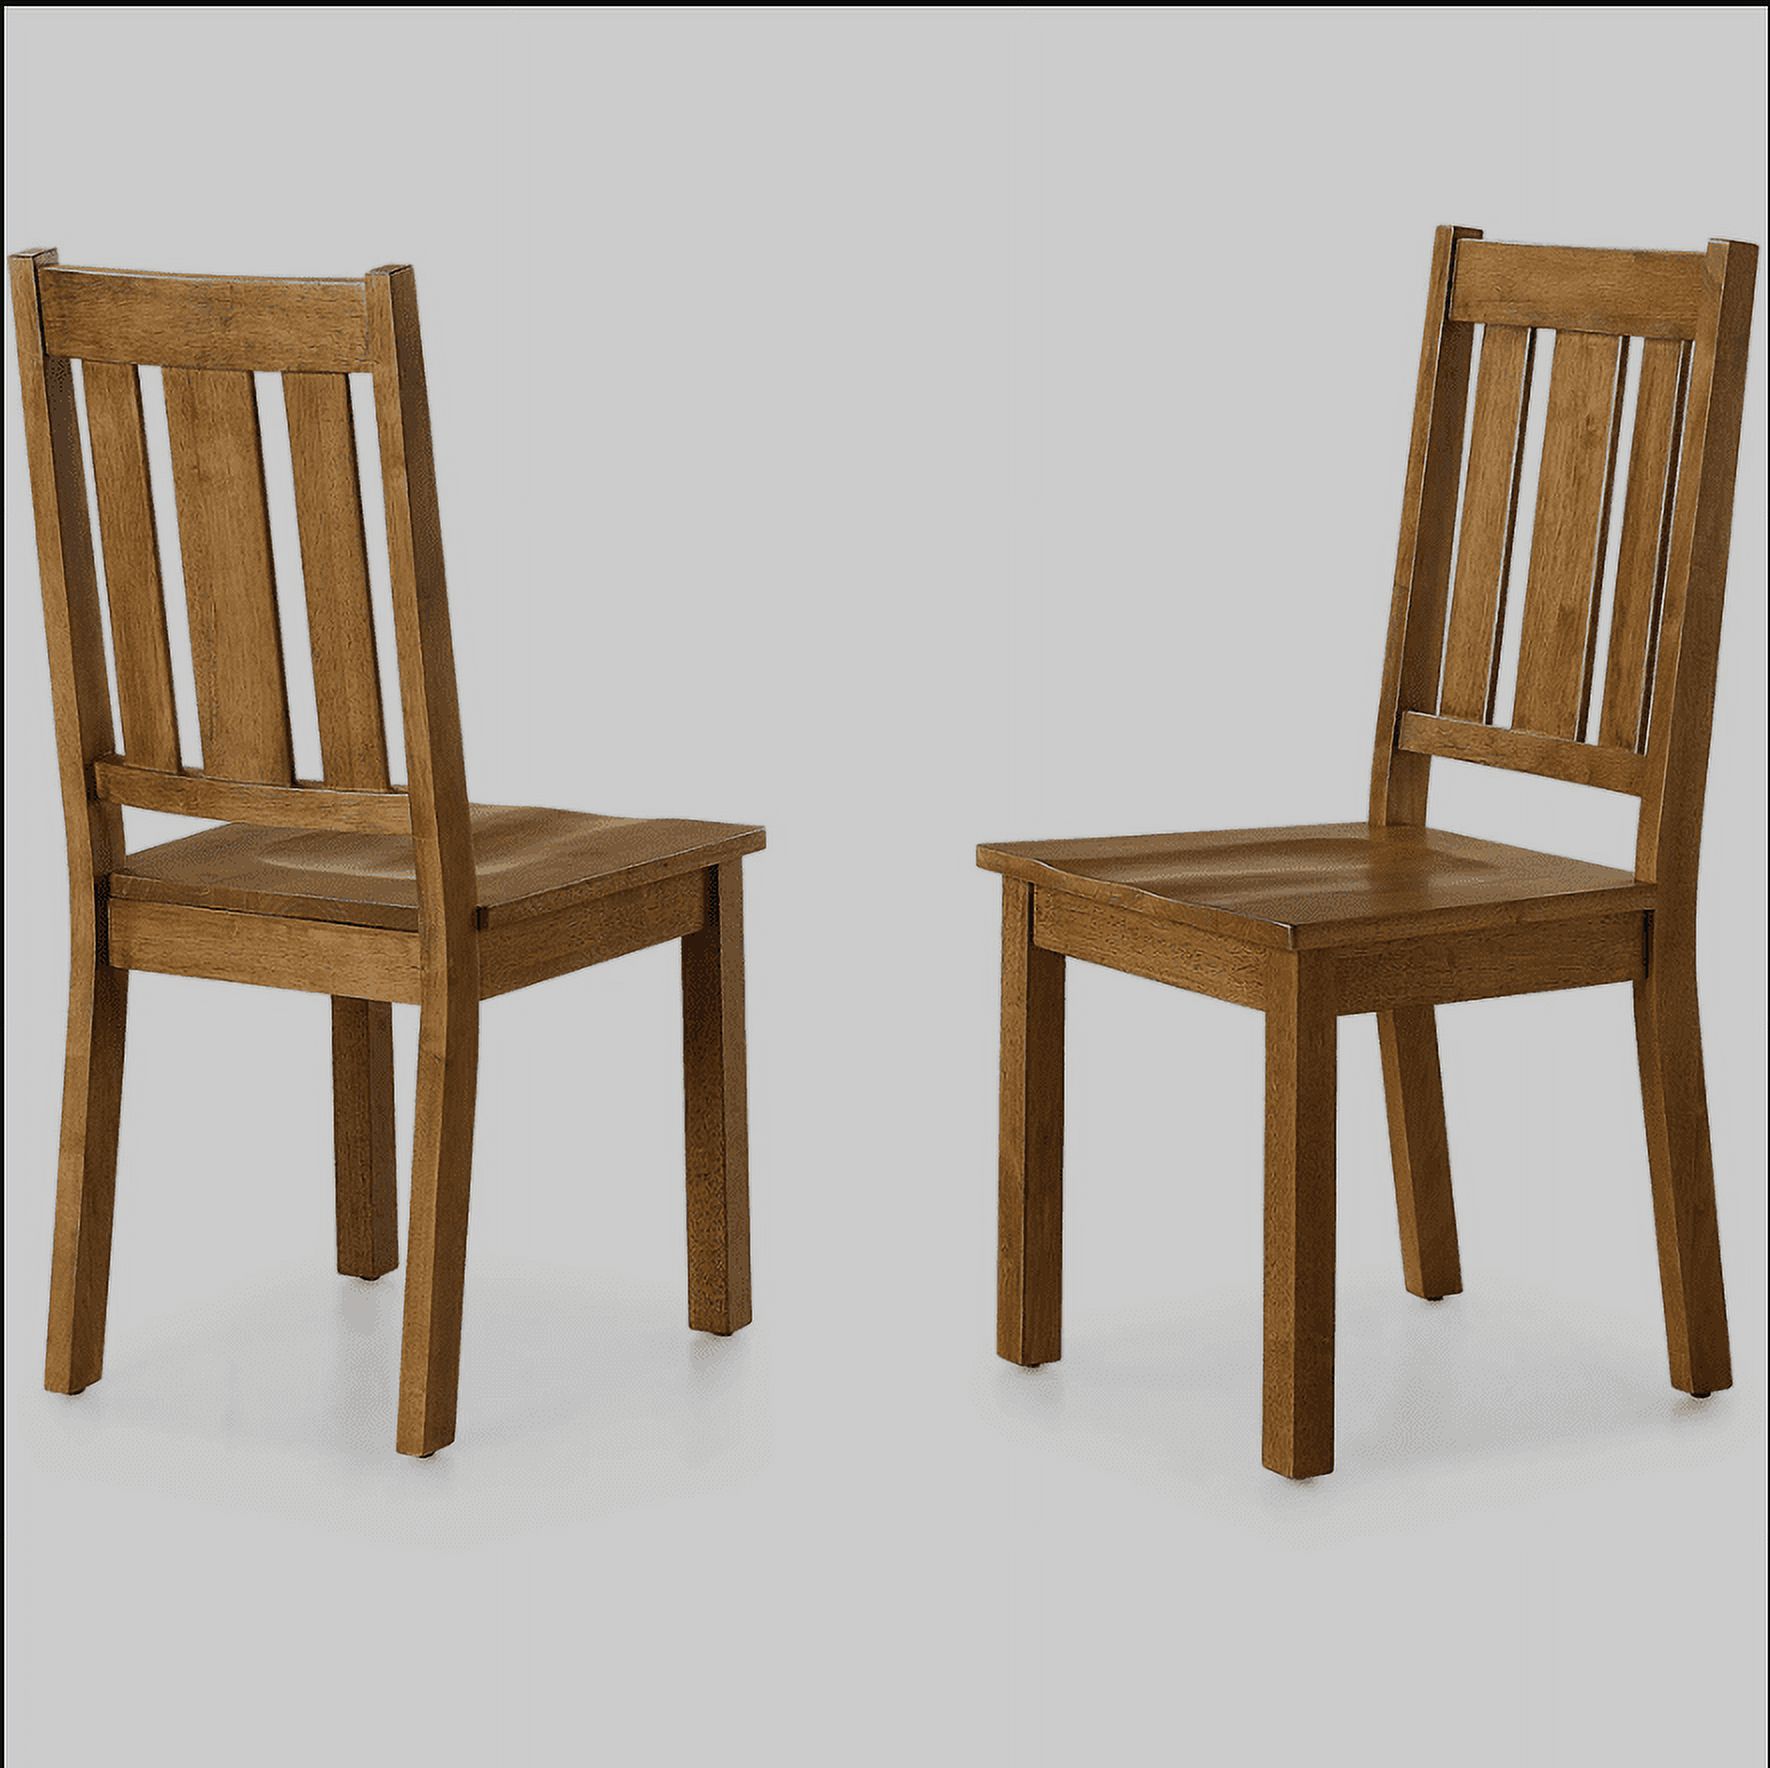 Better Homes and Gardens Bankston Dining Chair, Set of 2, Honey - image 2 of 6